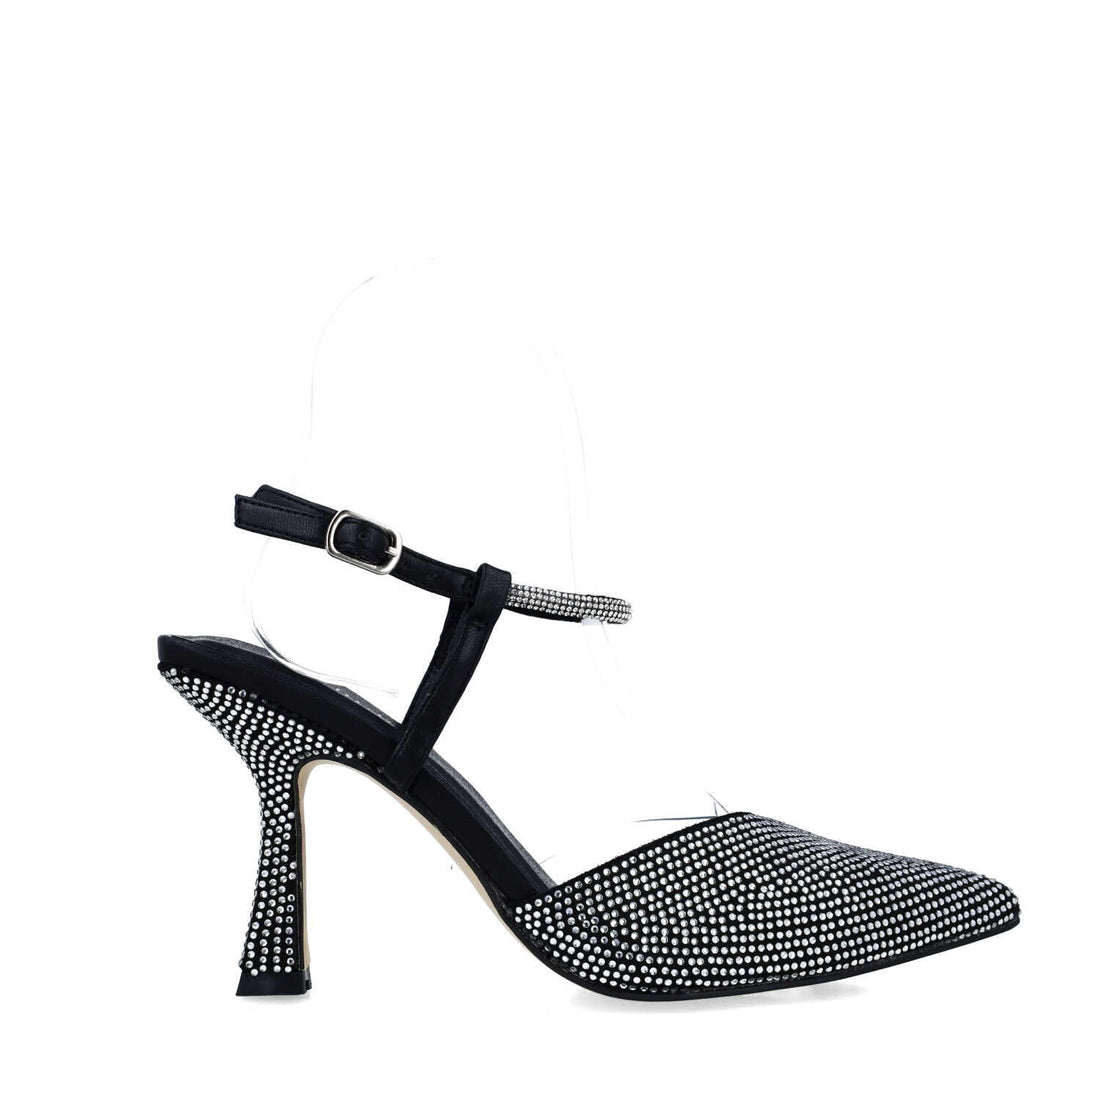 Black Pumps With Ankle Strap_24738_01_01